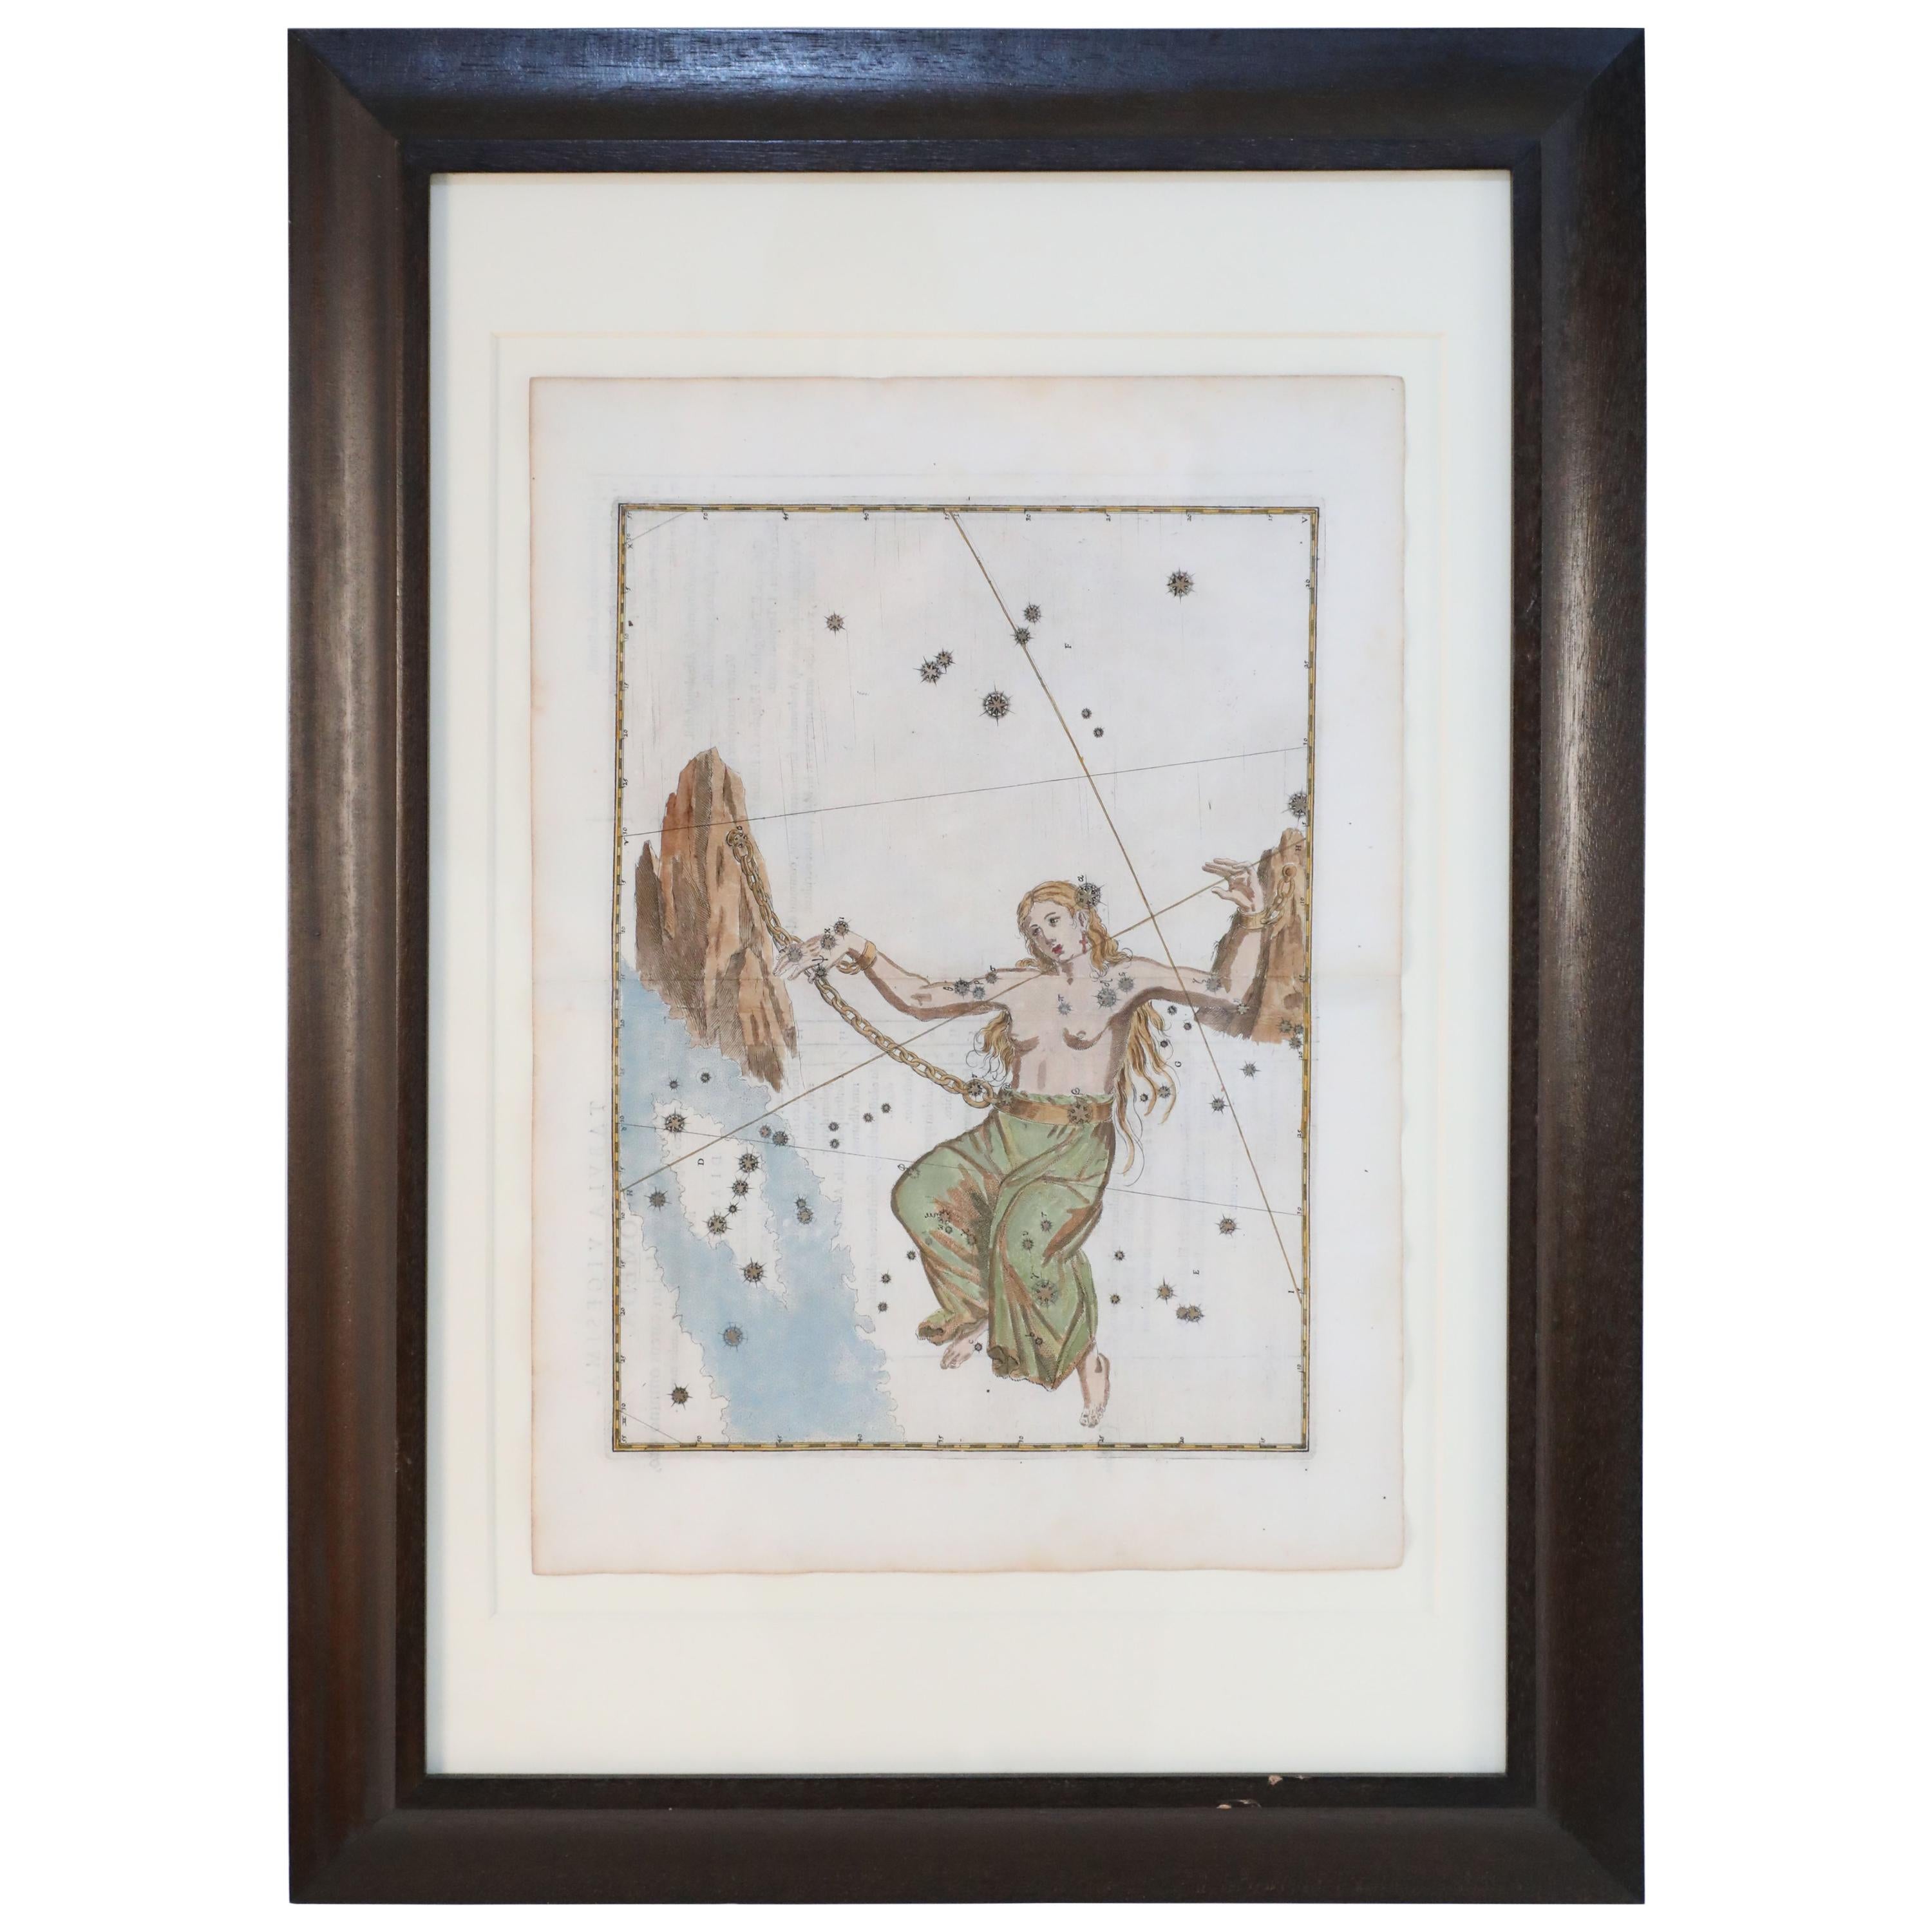 Set of 20 Renaissance Hand-Colored Engravings of Astronomy Star Charts